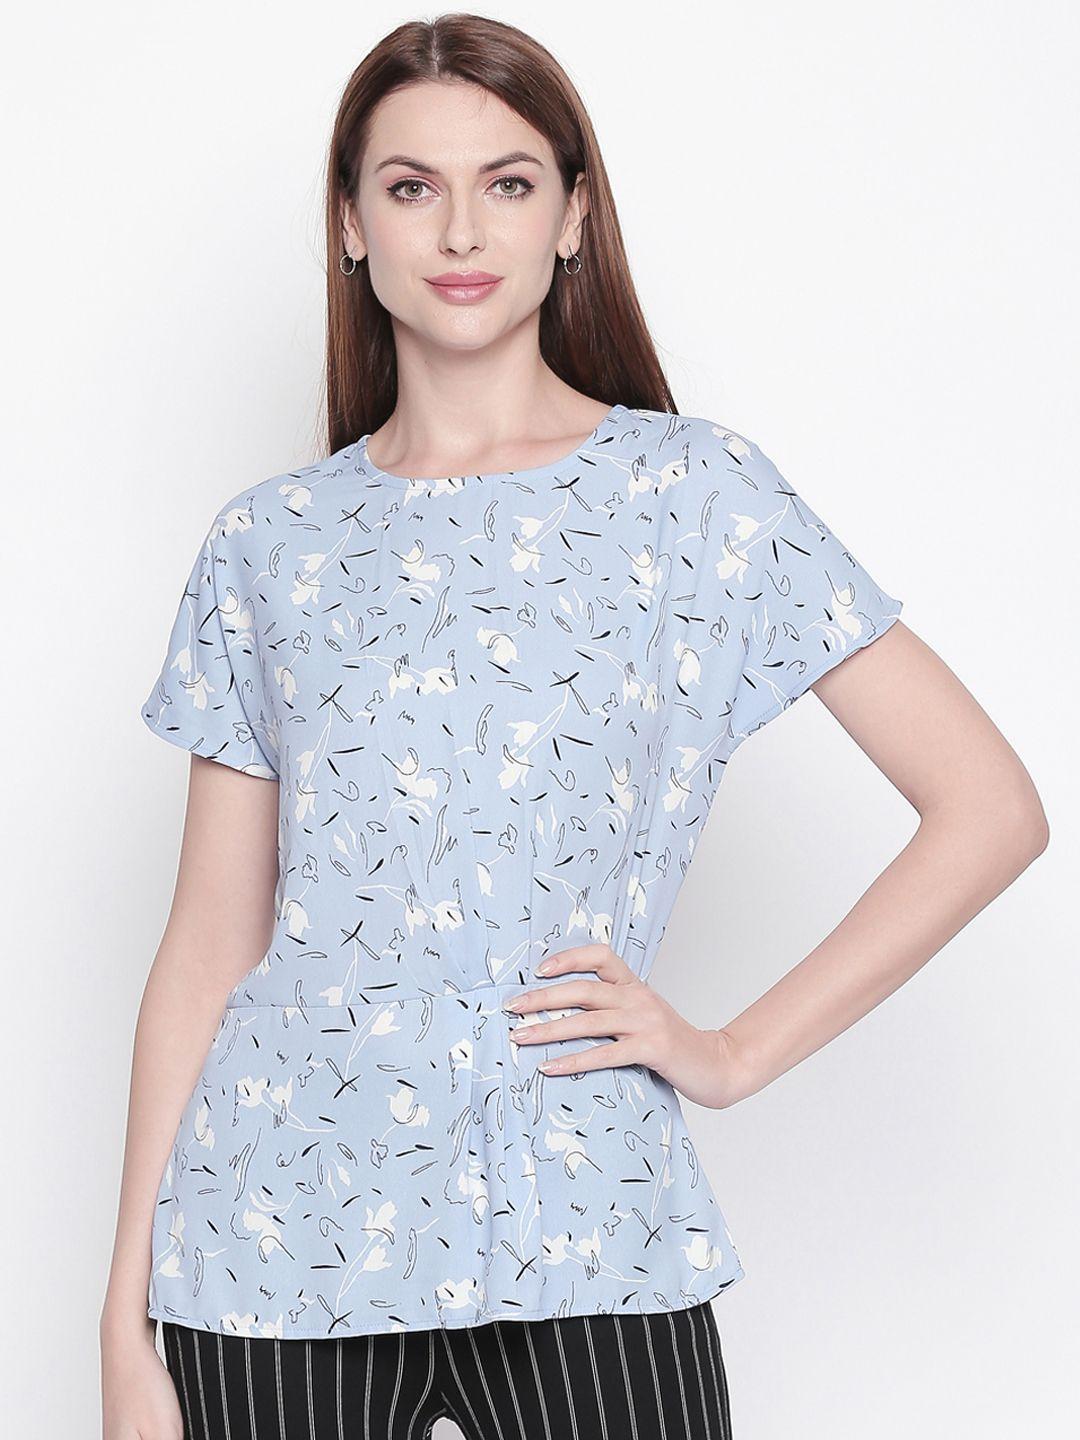 annabelle-by-pantaloons-women-blue-&-white-floral-printed-top